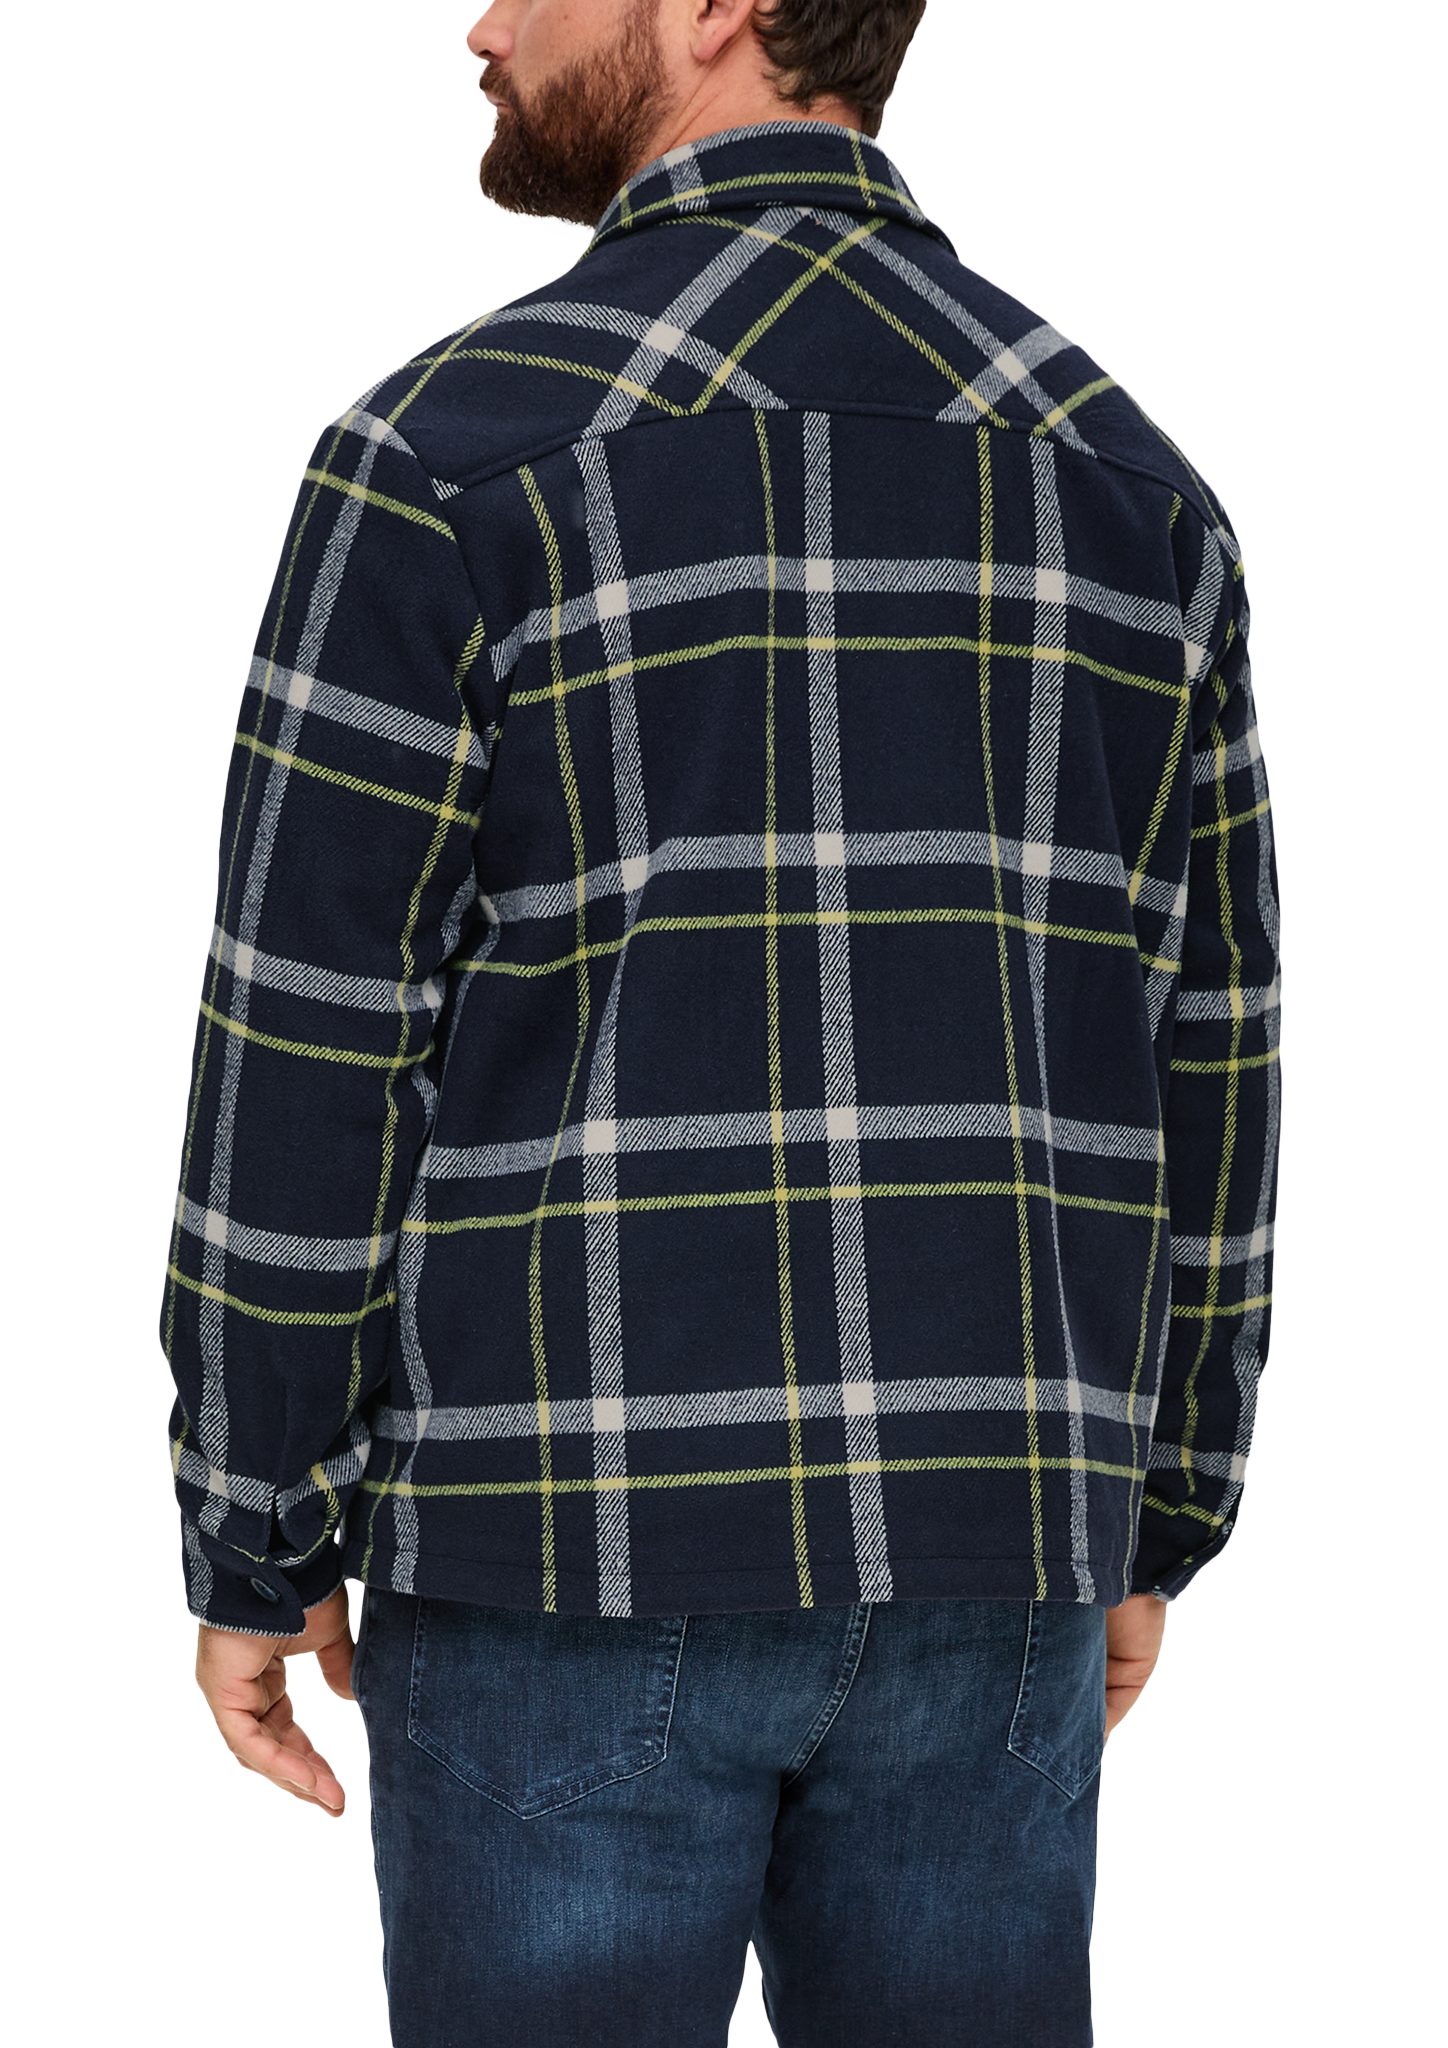 Overshirt Outdoorjacke in Flanell-Qualität s.Oliver